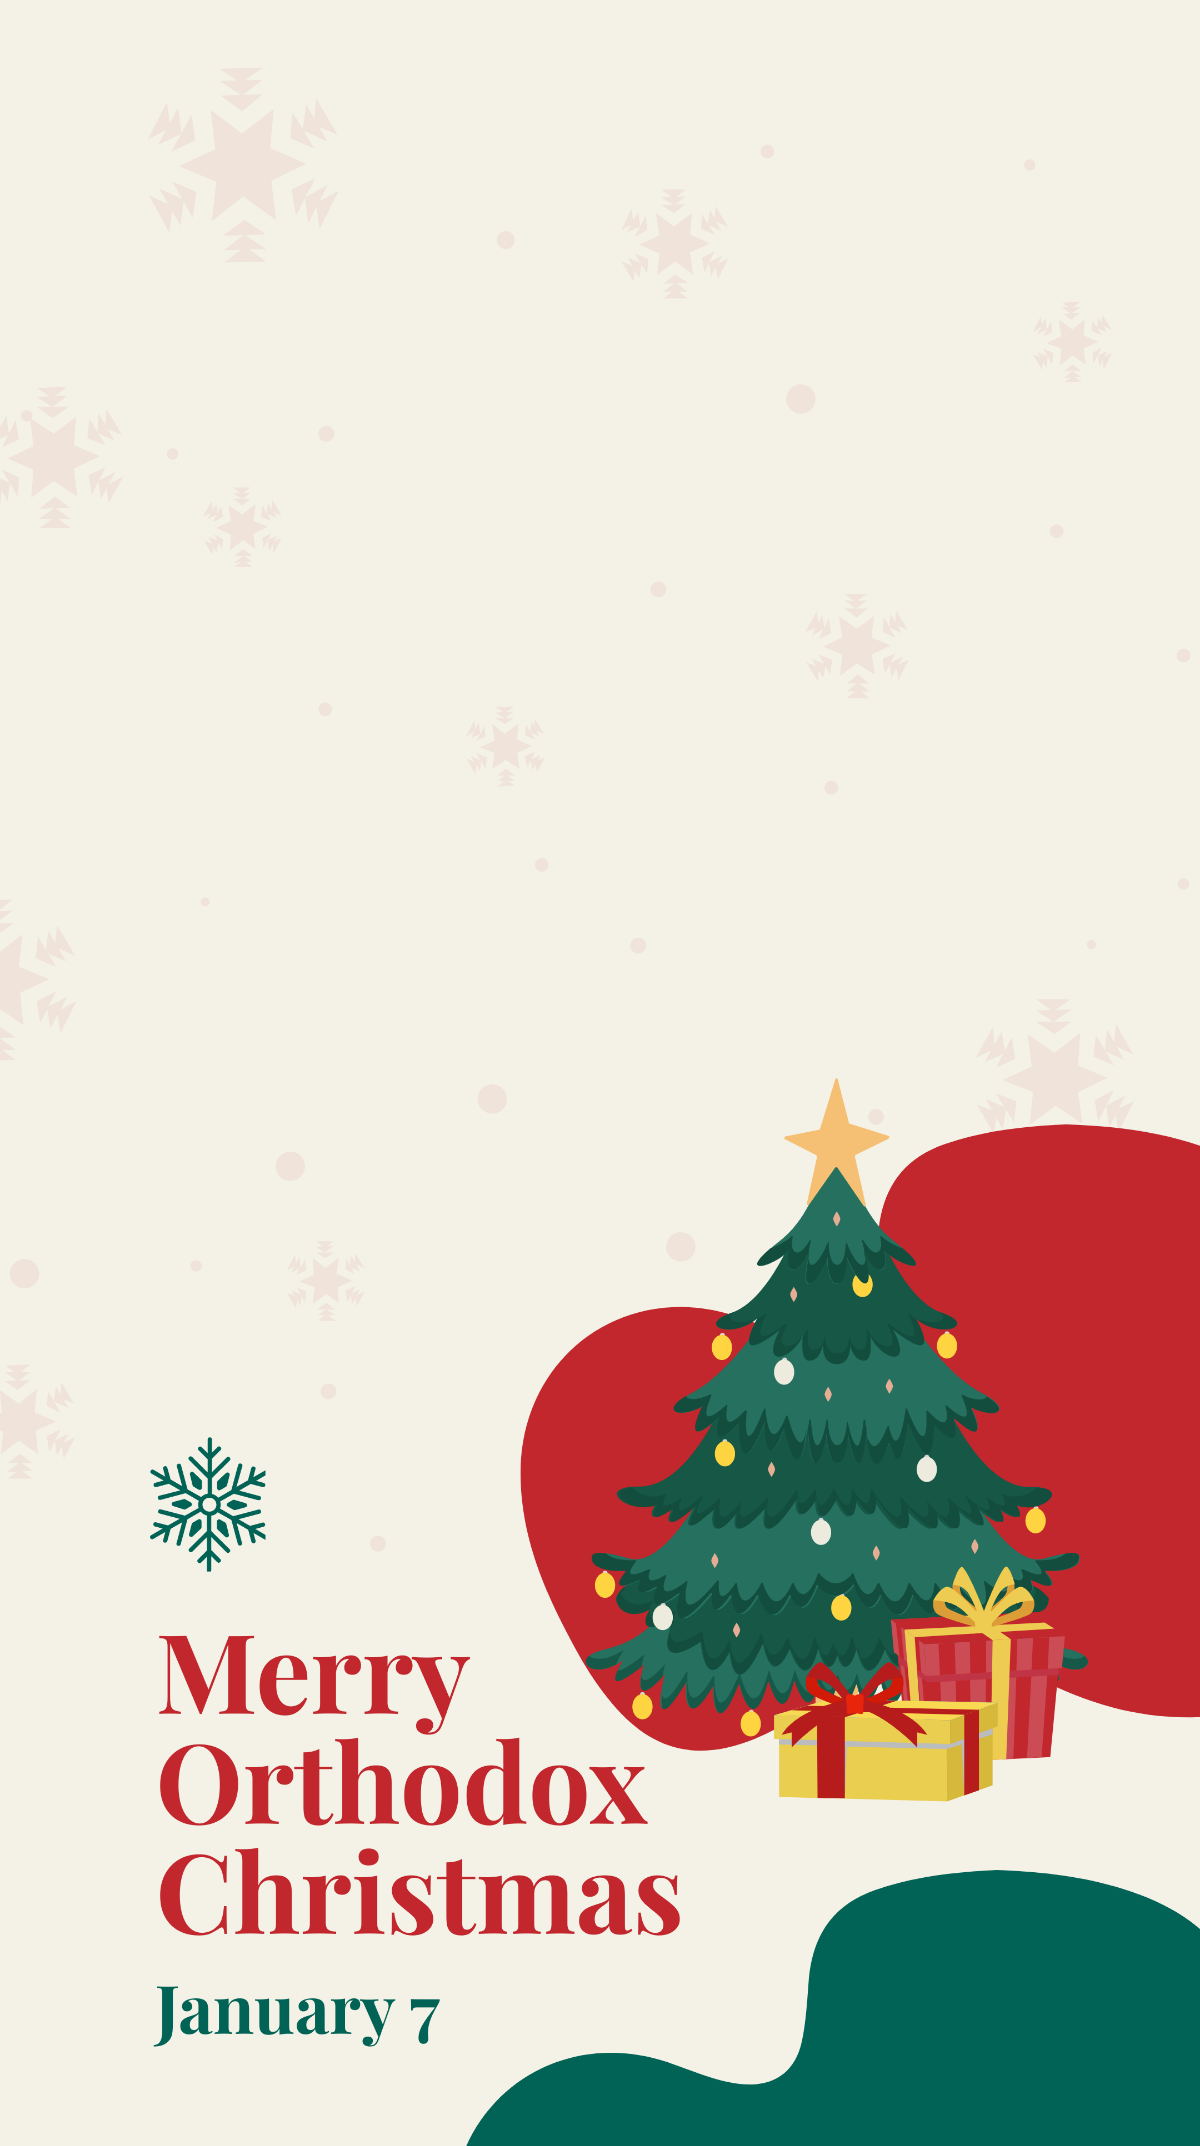 Merry Orthodox Christmas Snapchat Geofilter Template